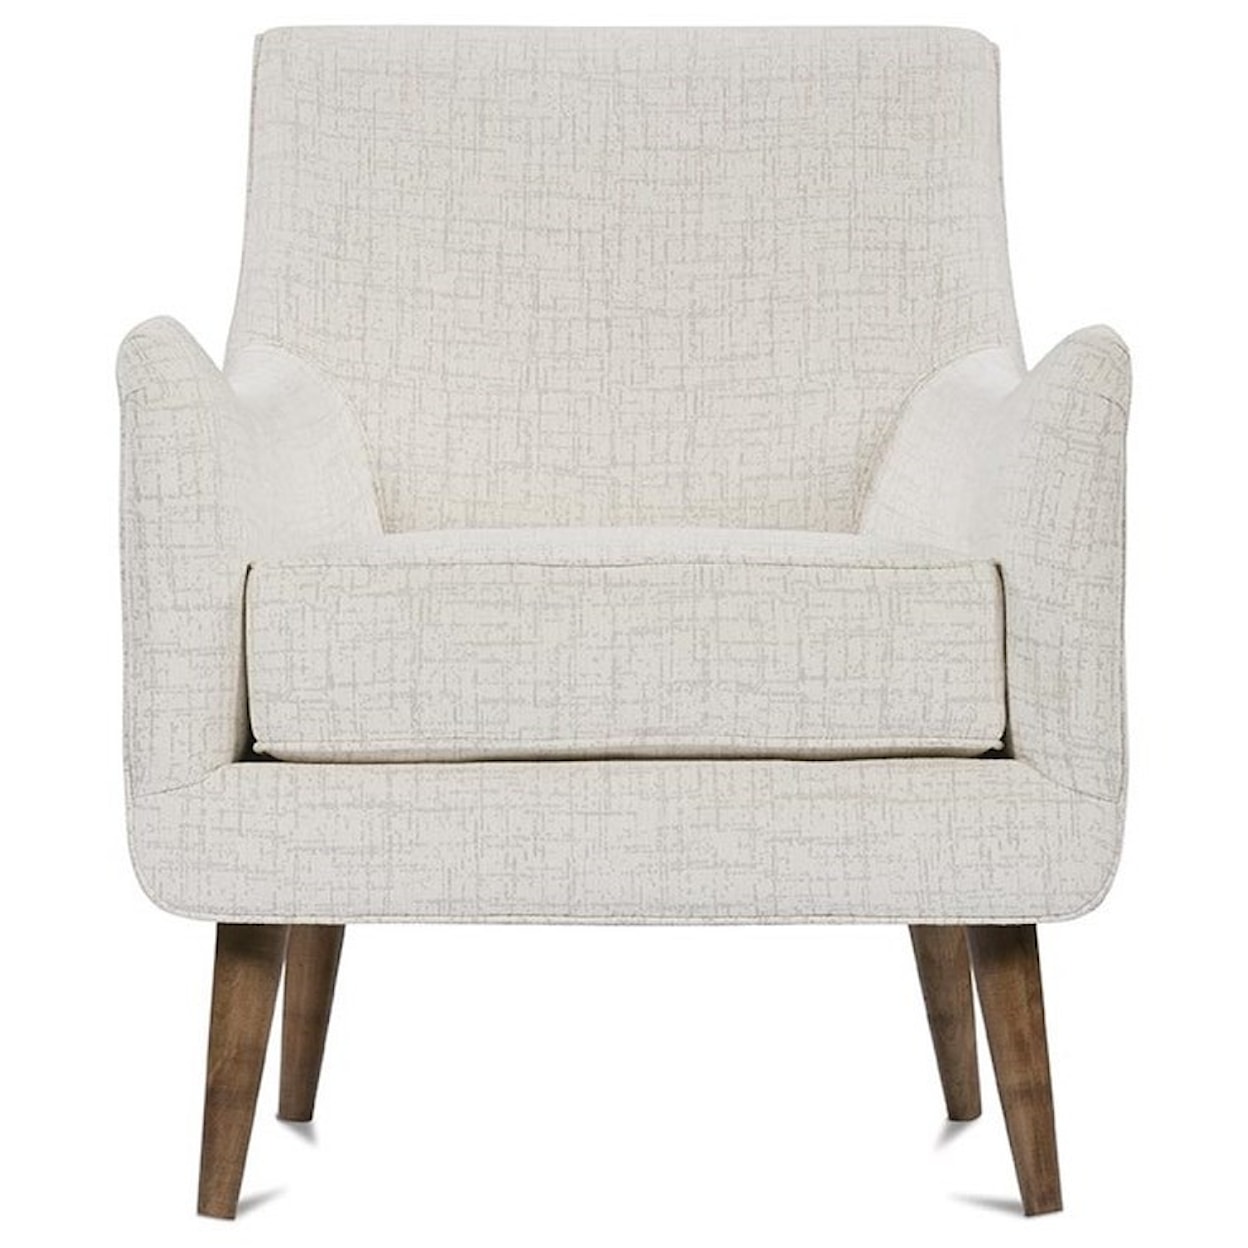 Rowe Chairs and Accents Nolan Chair